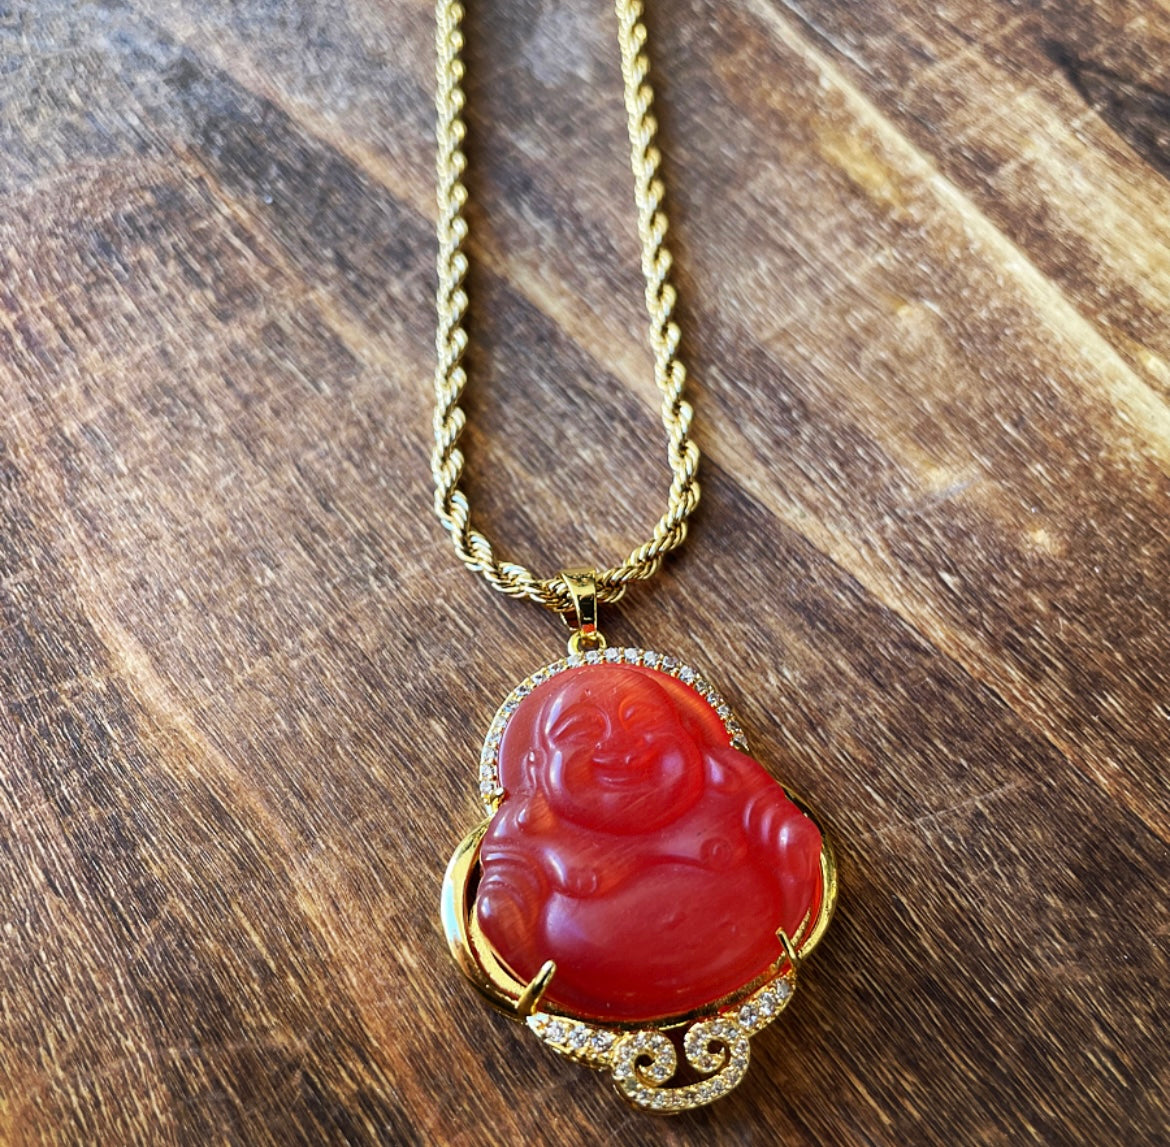 Buddha Necklace with CZ Accents